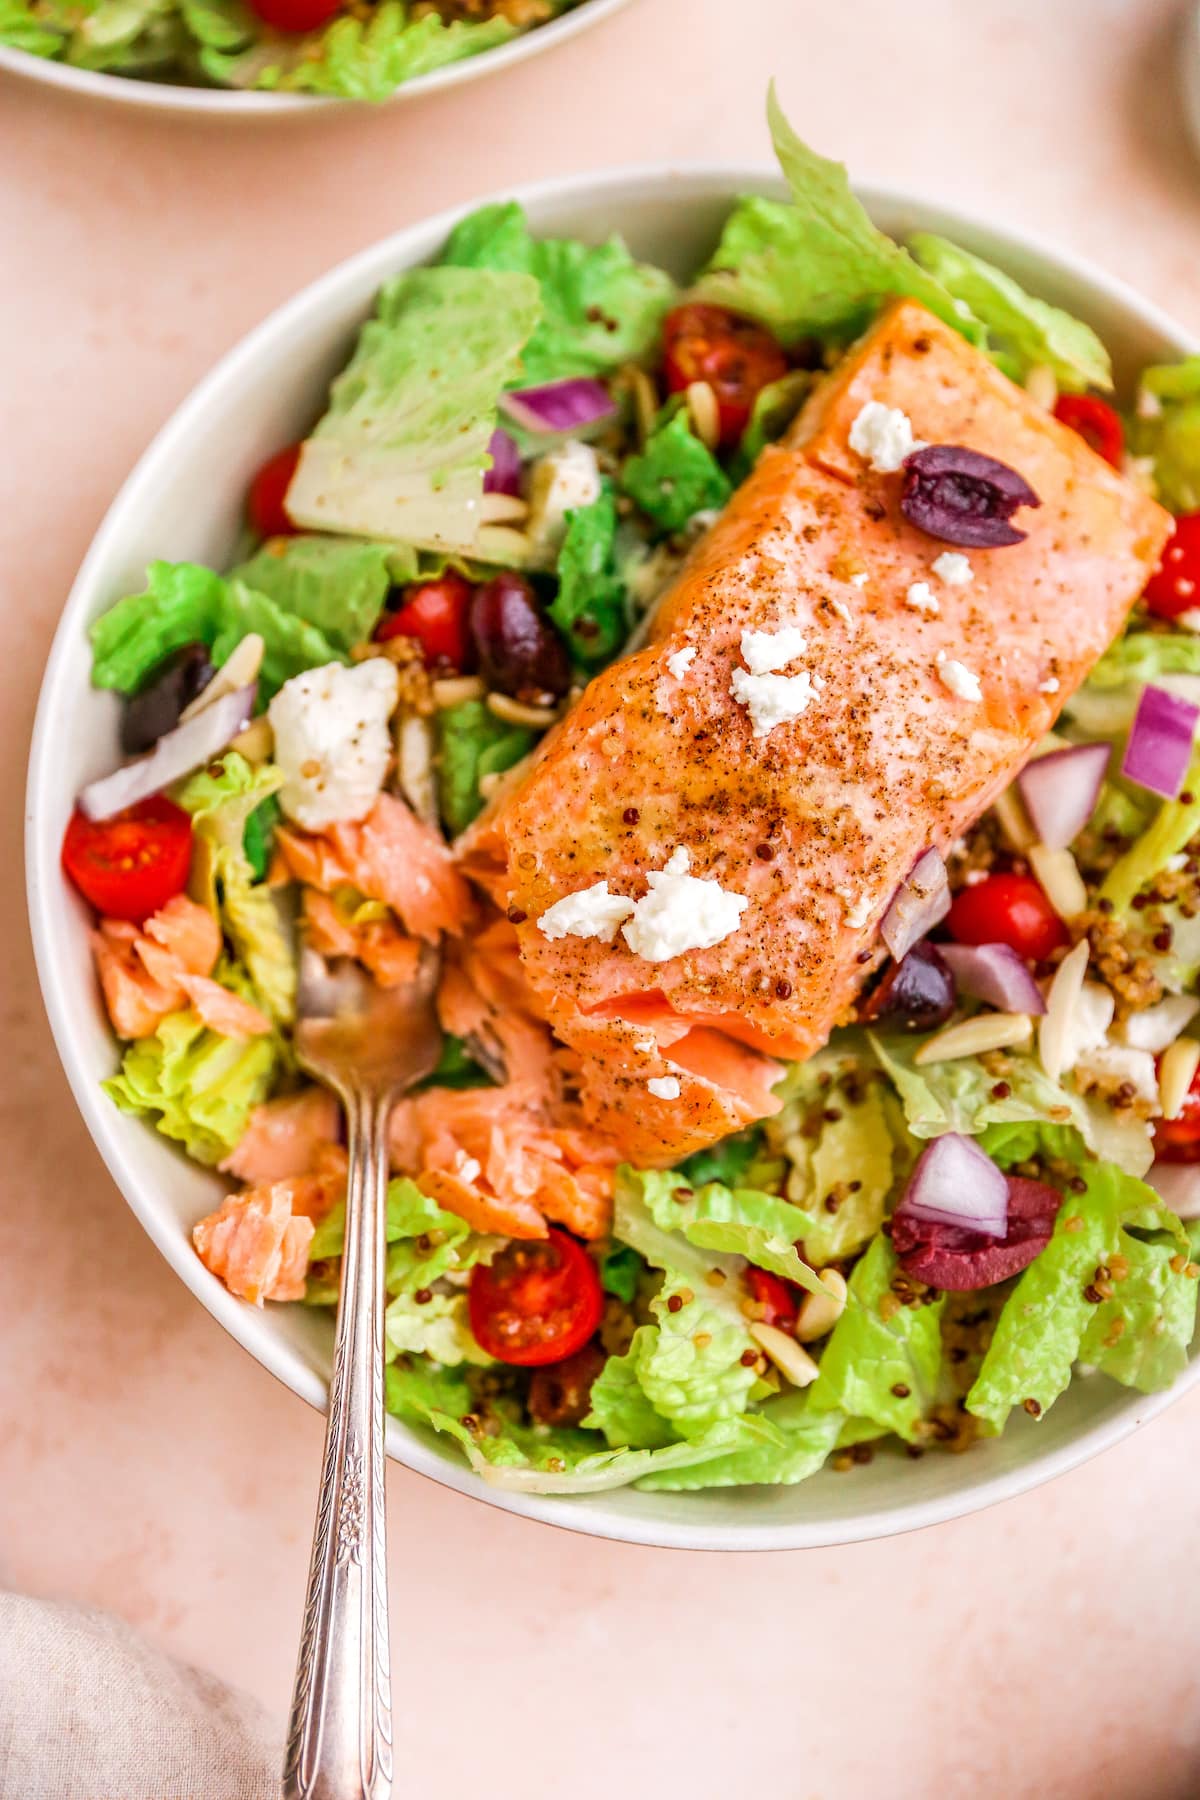 A bowl with mediterranean salad topped with a filet of salmon.